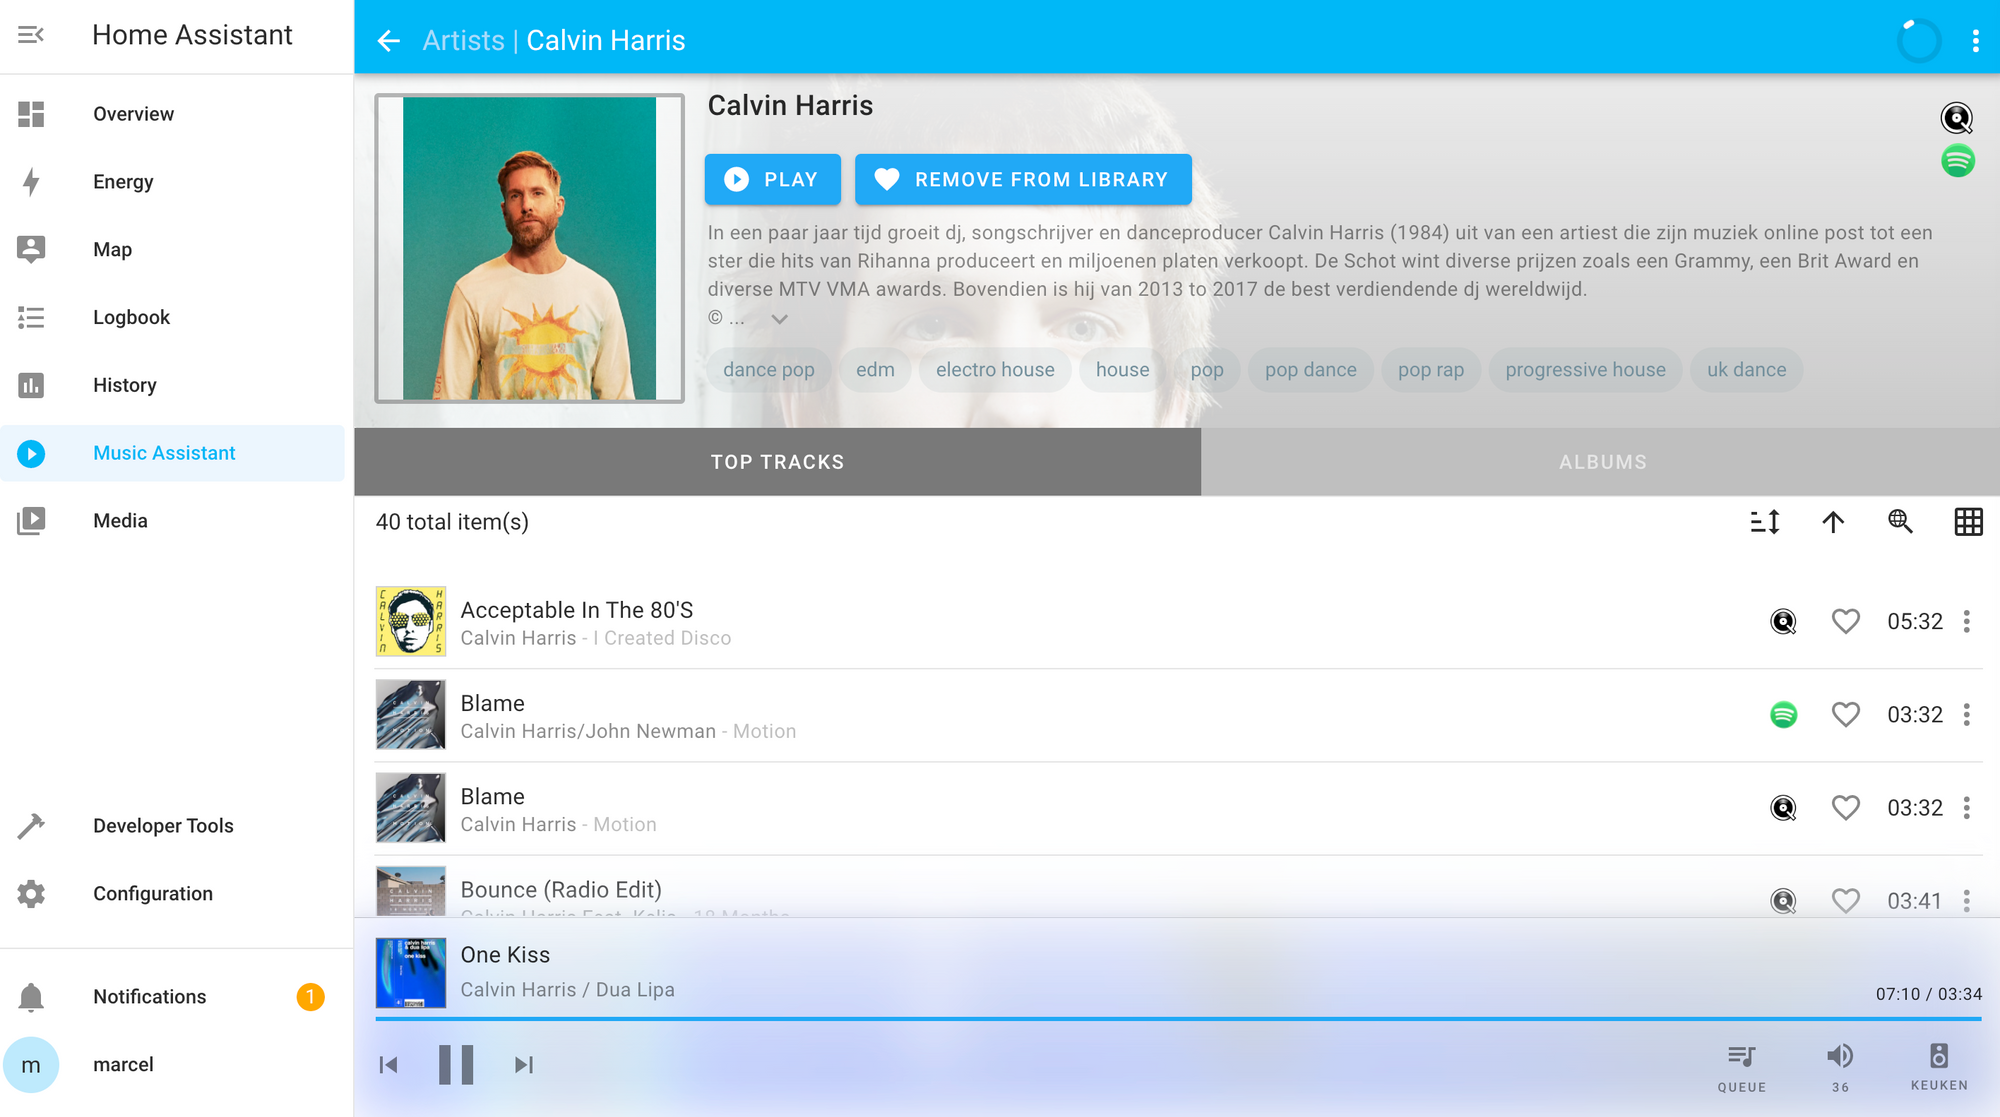 Home Assistant interface showing the Music Assistant panel showing the artist page of Calvin Harris with various audio controls.